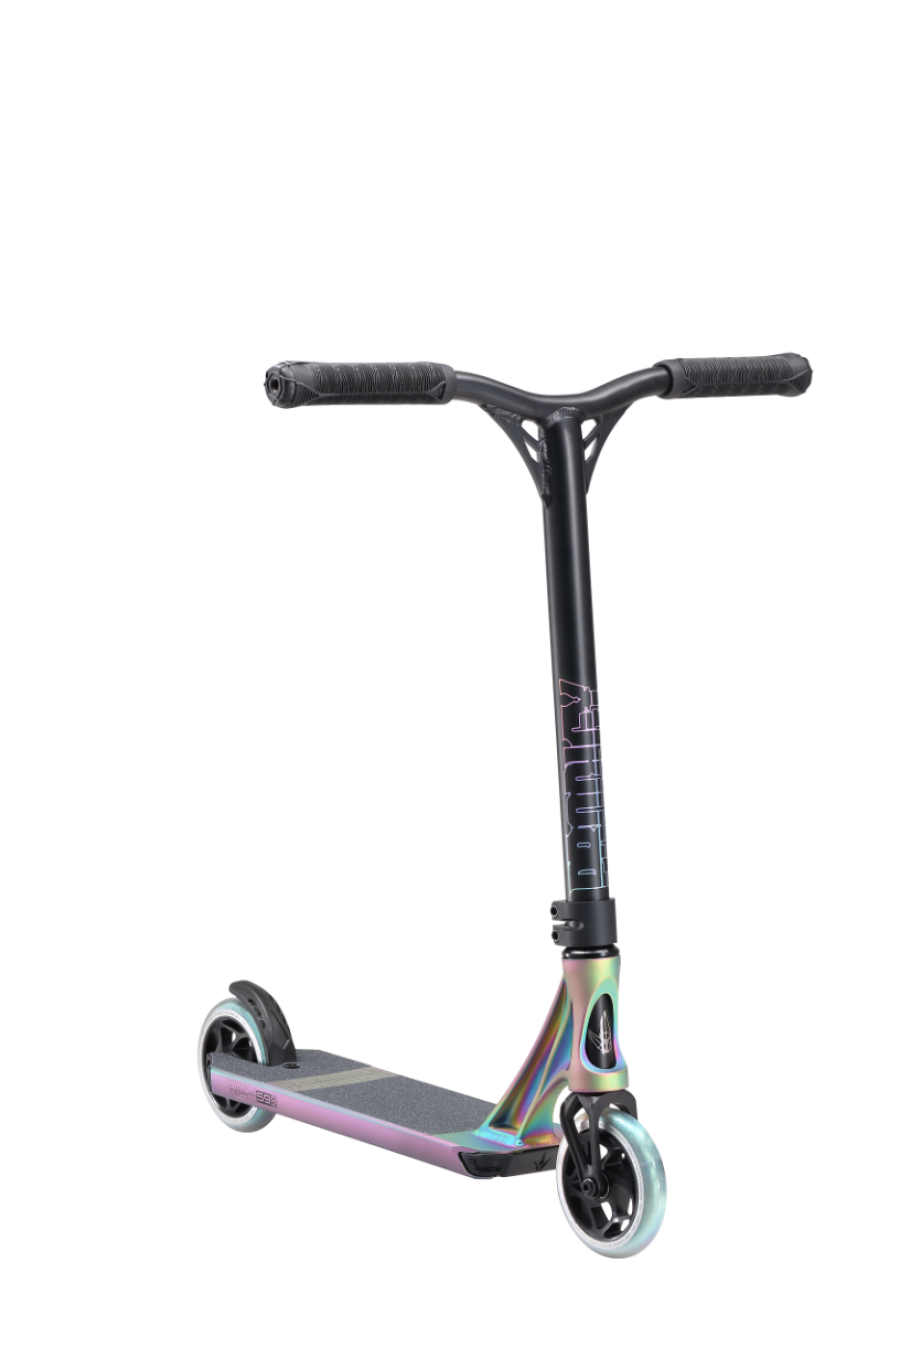 Envy Prodigy S9 XS Complete Scooter (Matte Oil Slick)